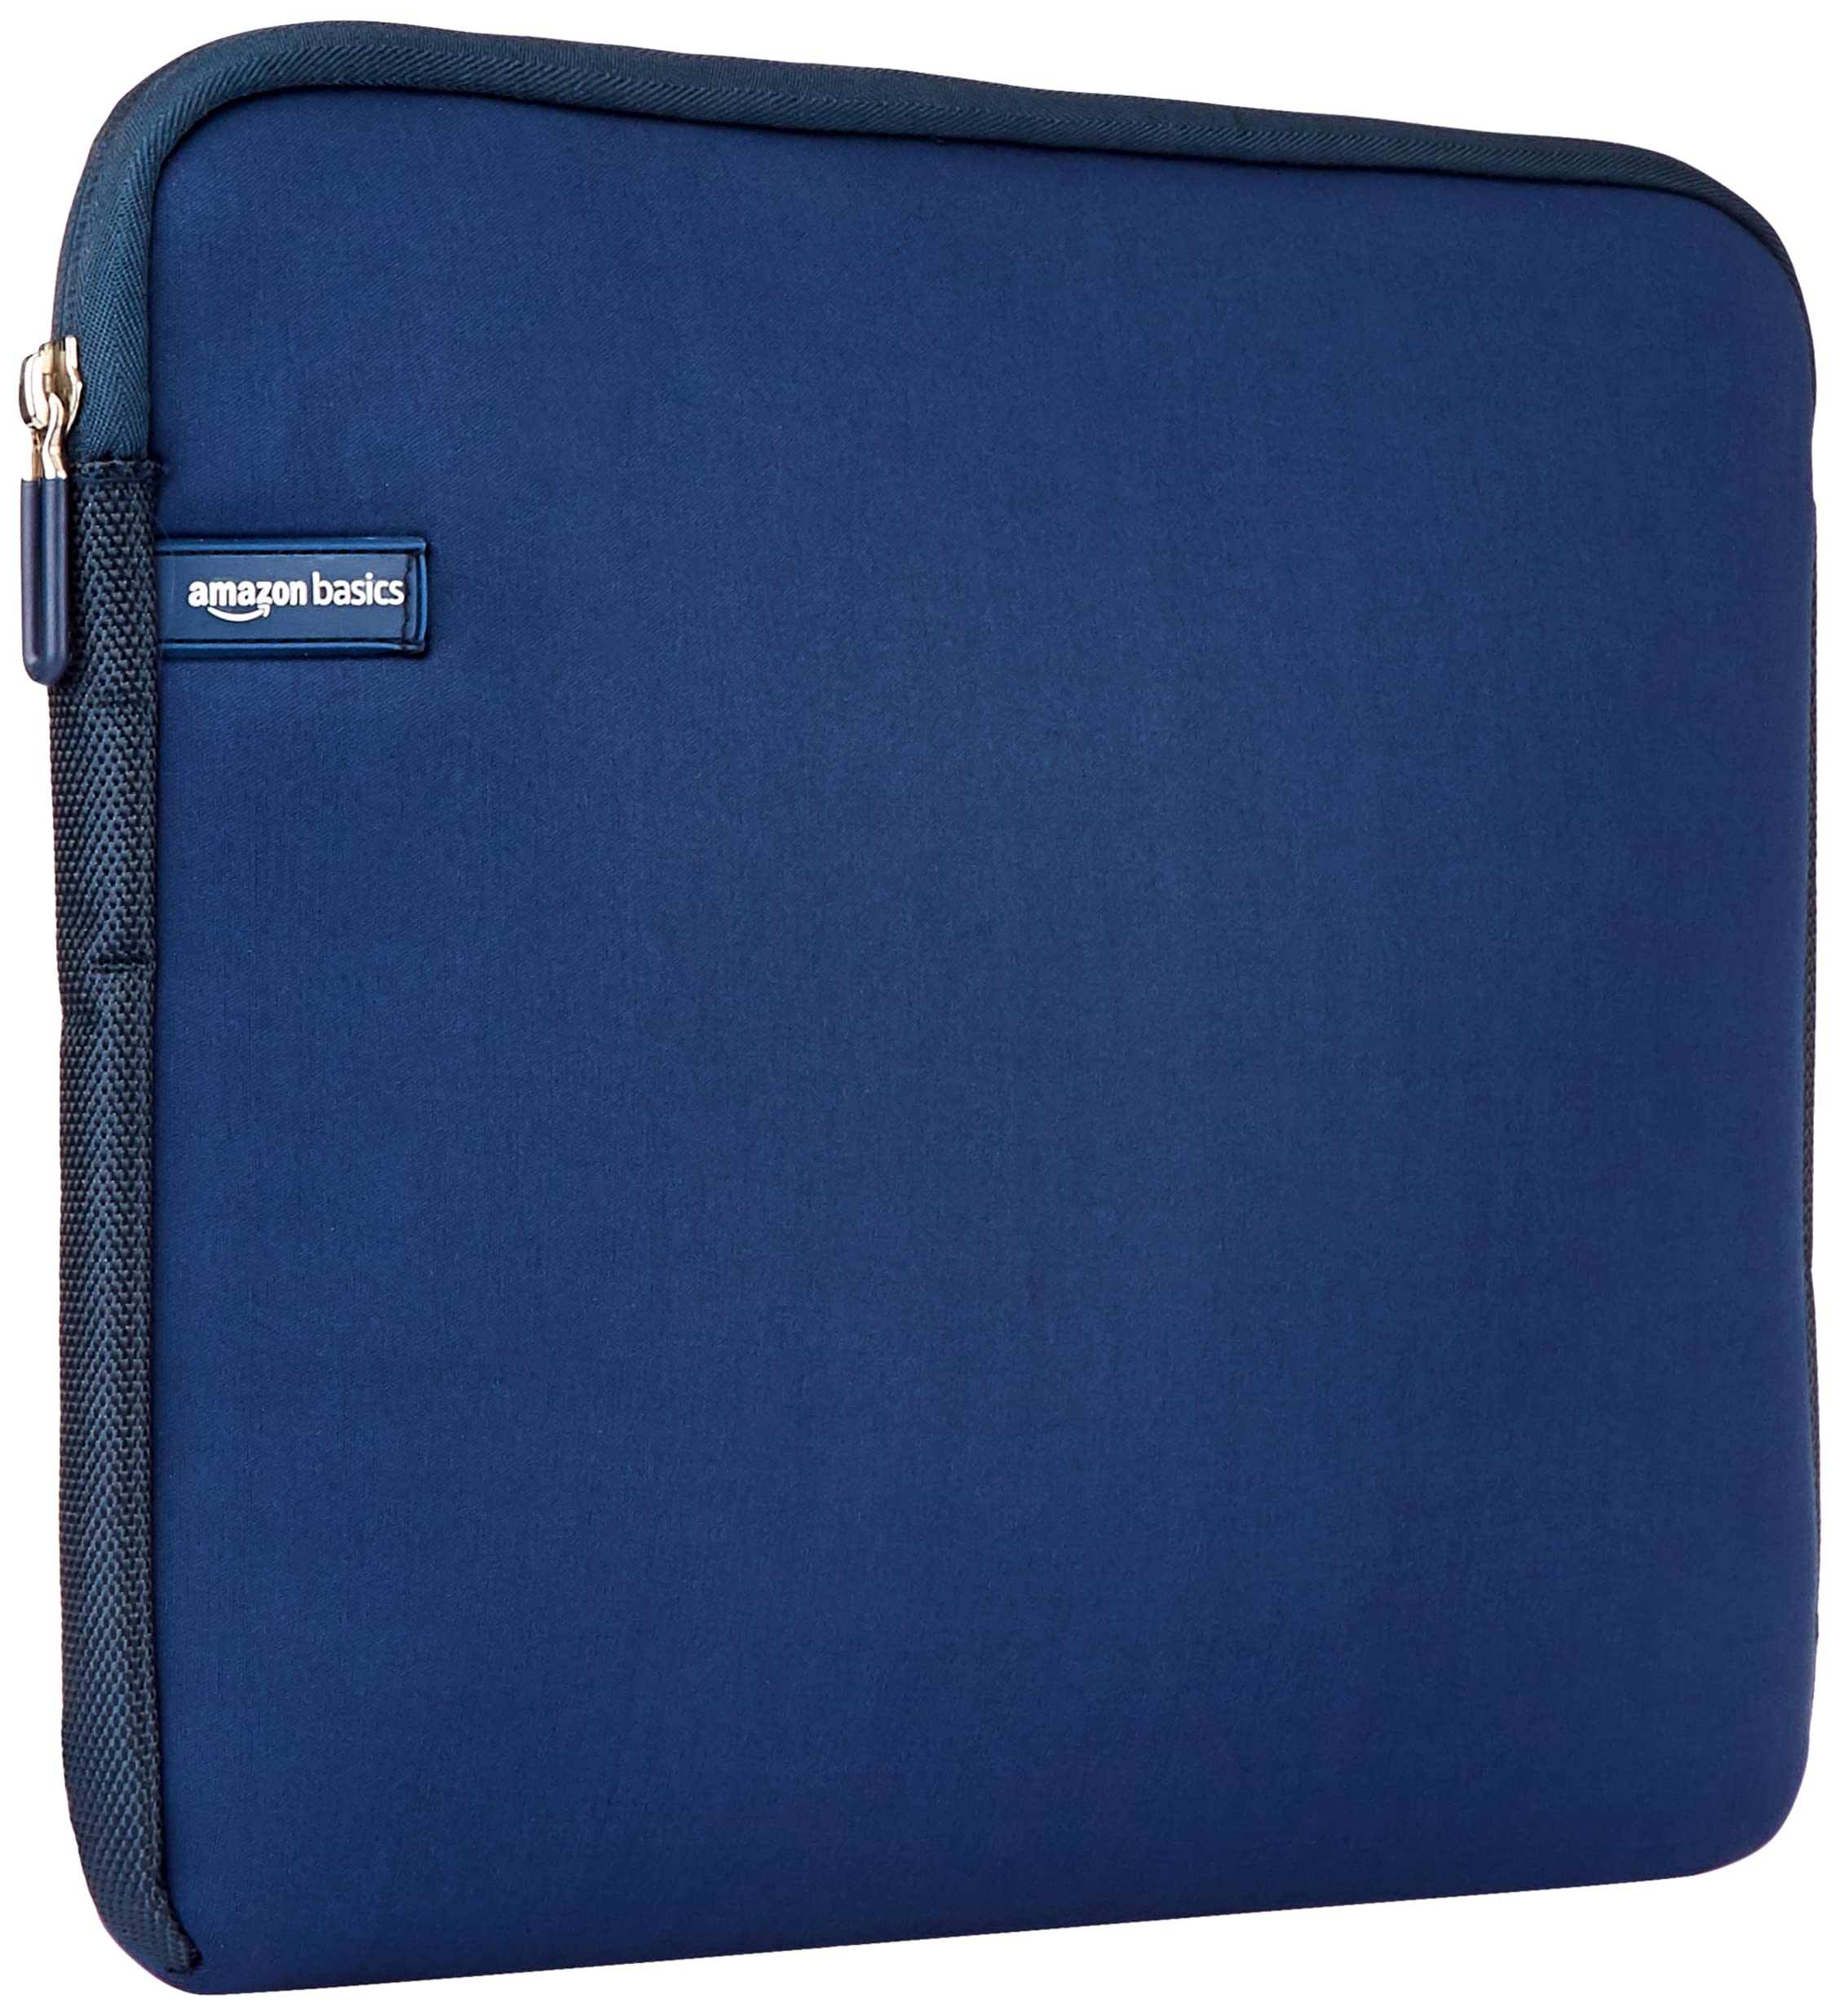 Book Cover Amazon Basics 11.6-Inch Laptop Sleeve, Protective Case with Zipper - Navy Blue